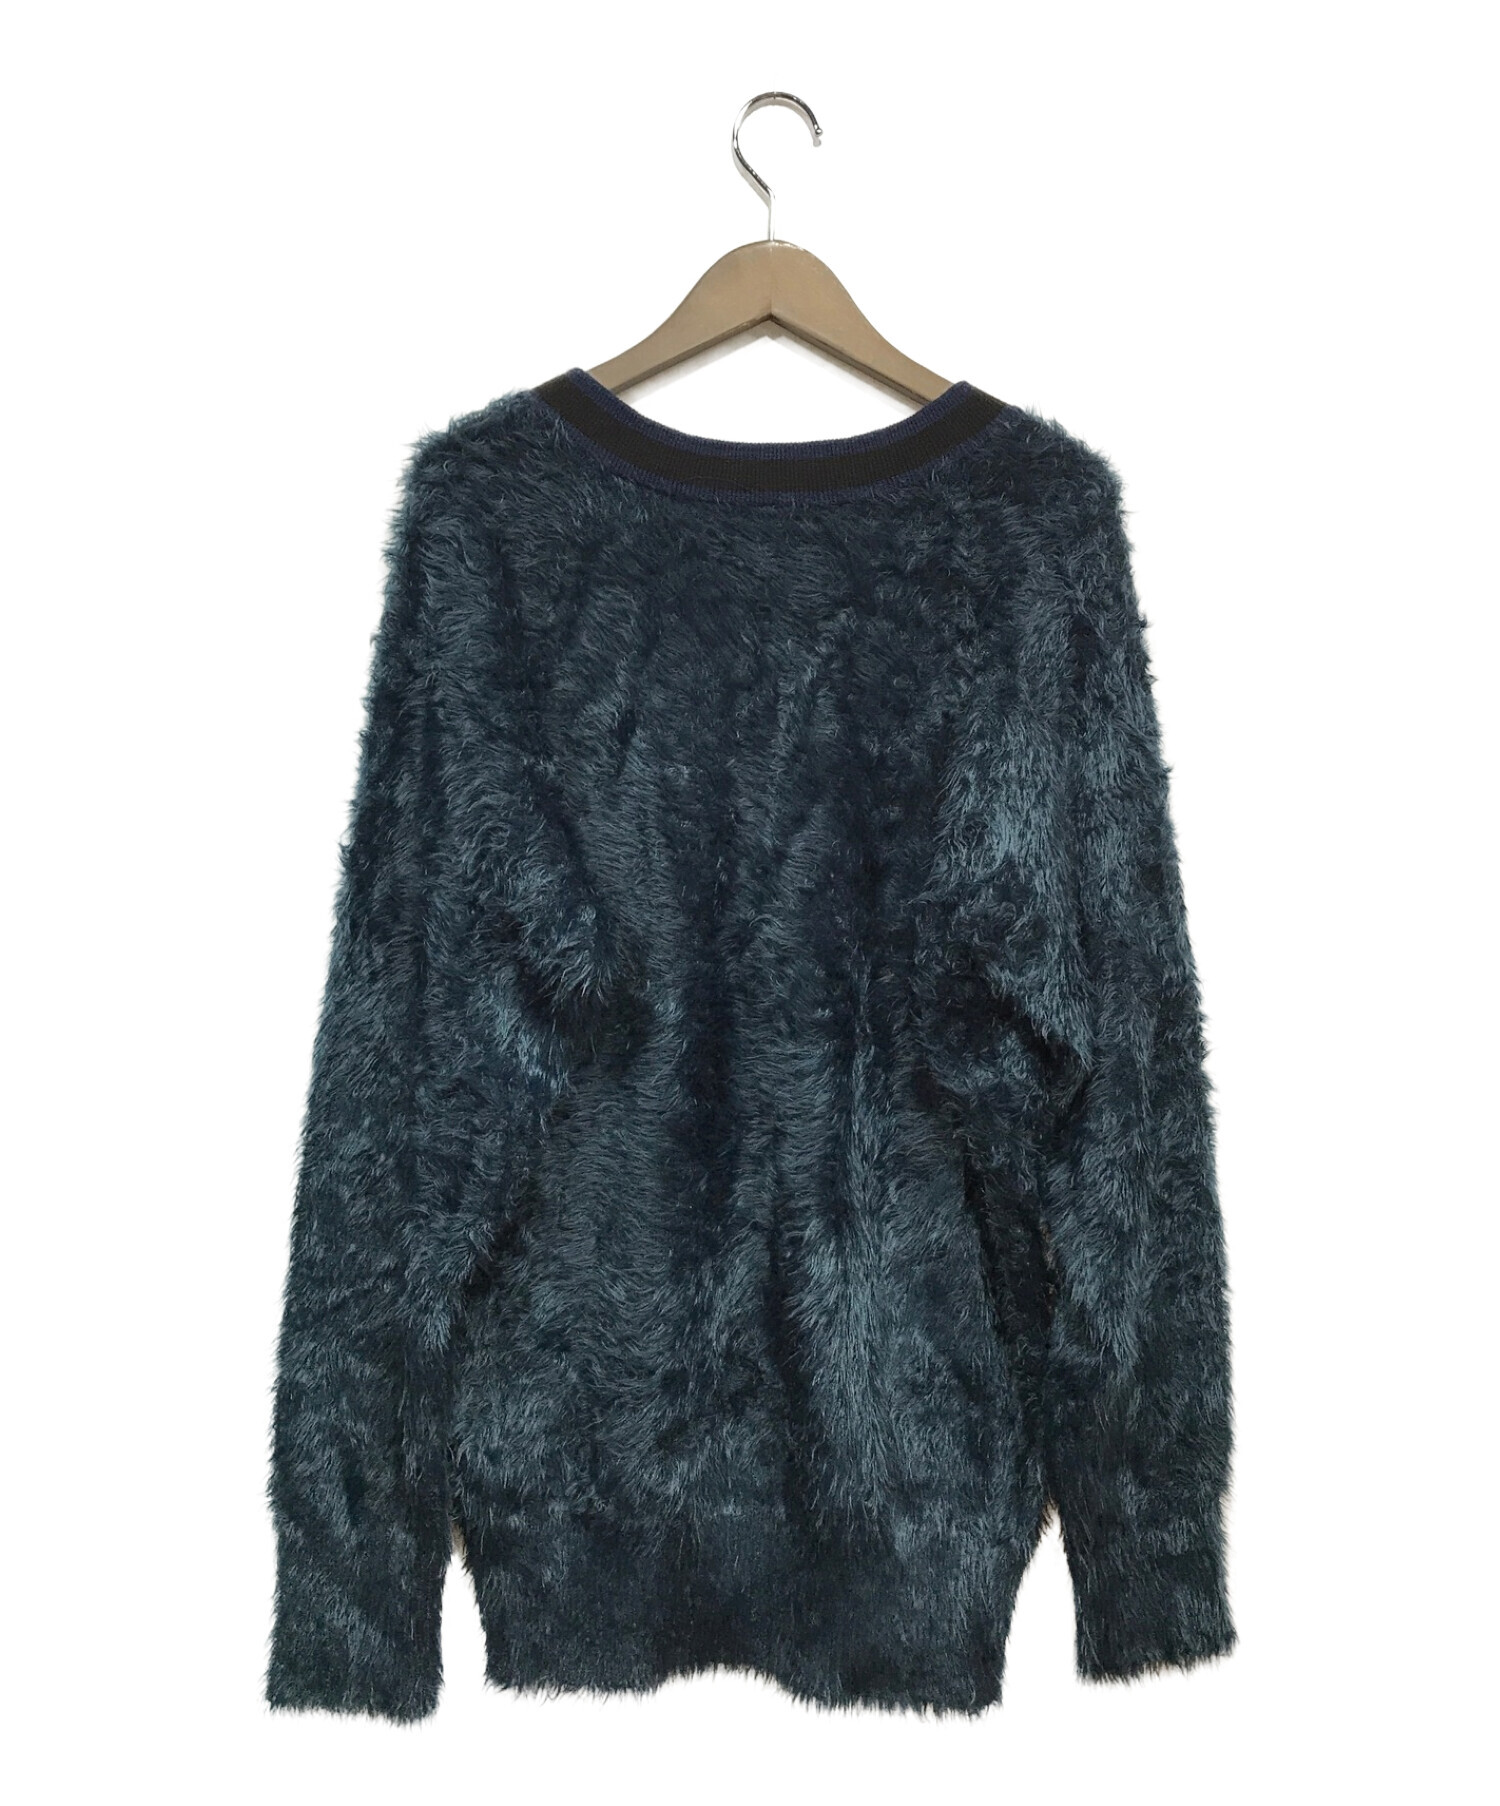 LONG SHAGGY PULL-OVER size1